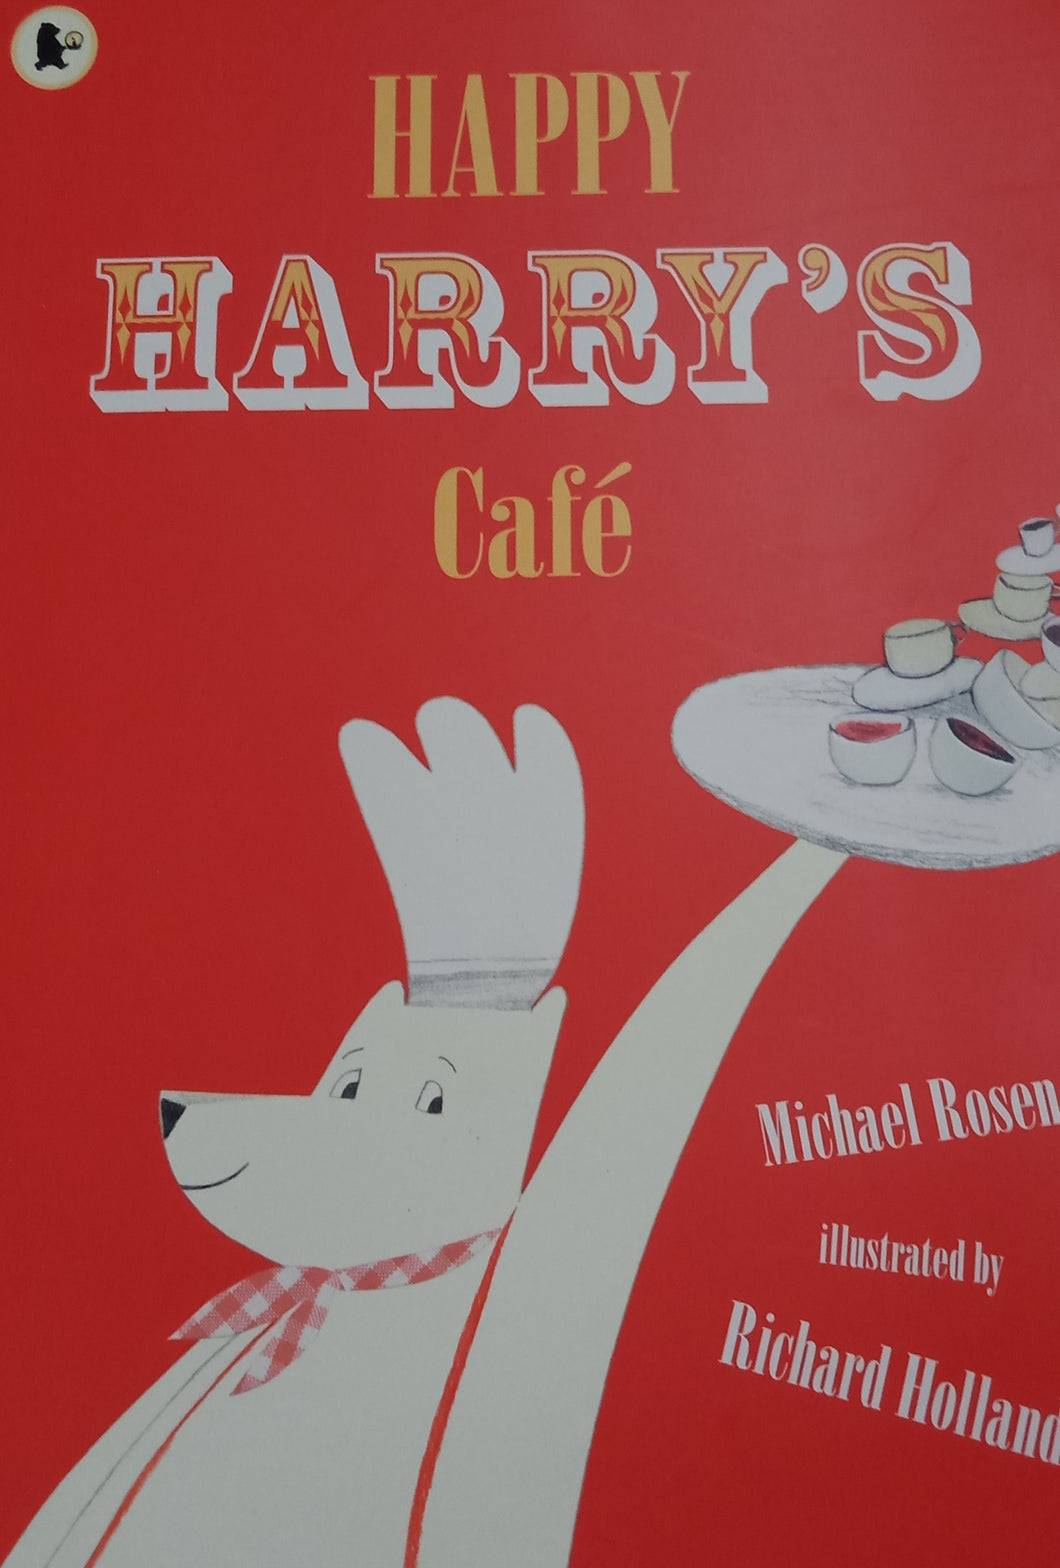 Hapoy Harry's Cafe by Michael Rosen